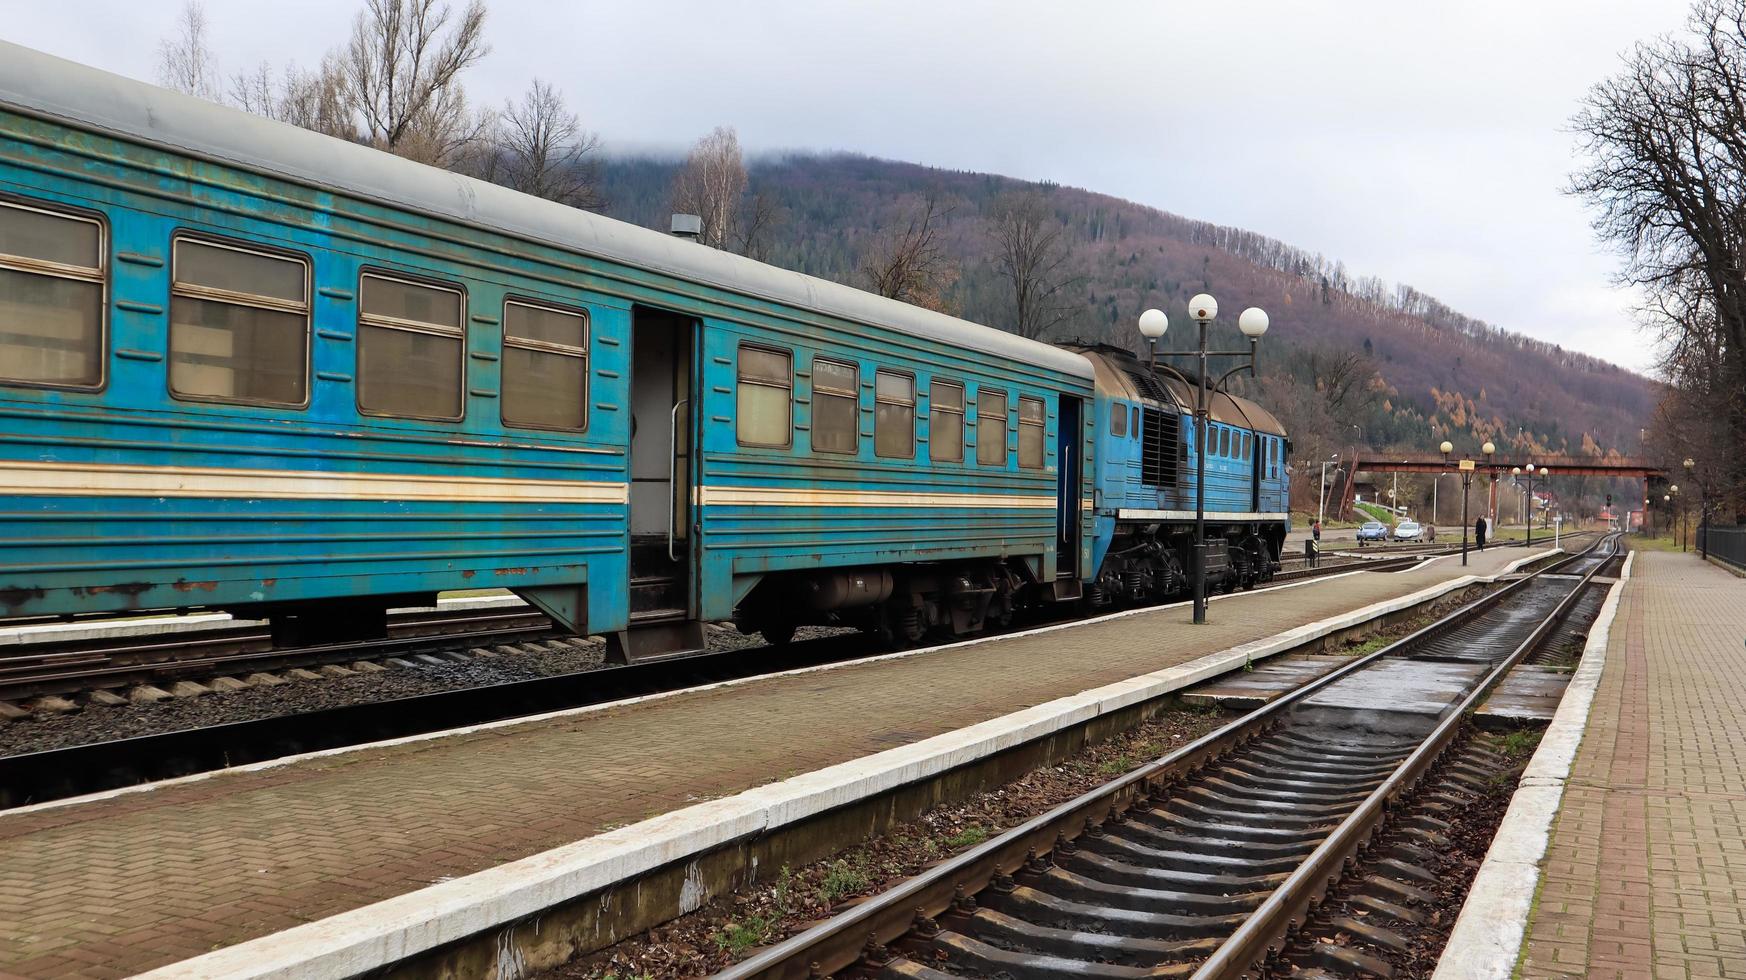 Ukraine, Yaremche - November 20, 2019. train at the station on a background of mountains. Unique railway cars on the platform in the city of Yaremche. Old diesel passenger train. Railroad station. photo